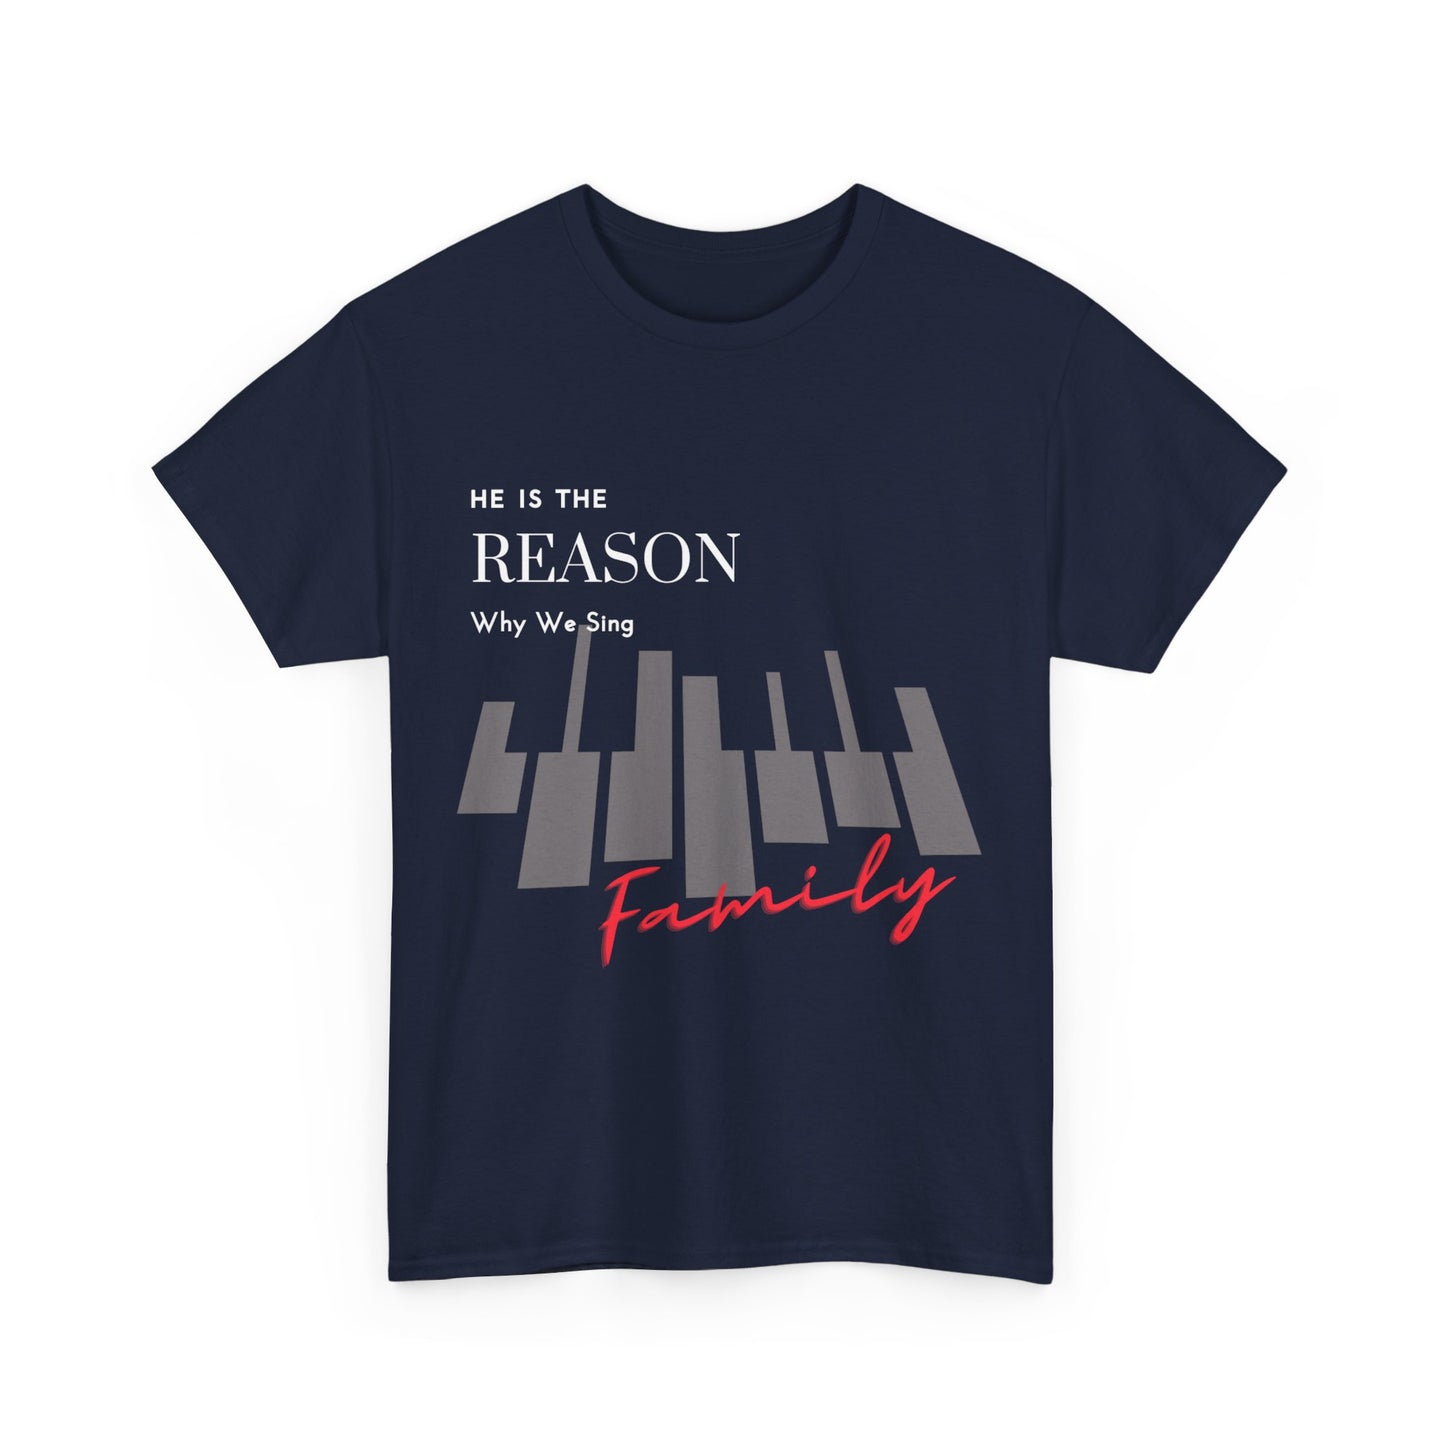 "He Is the Reason Why We Sing" Unisex Tee